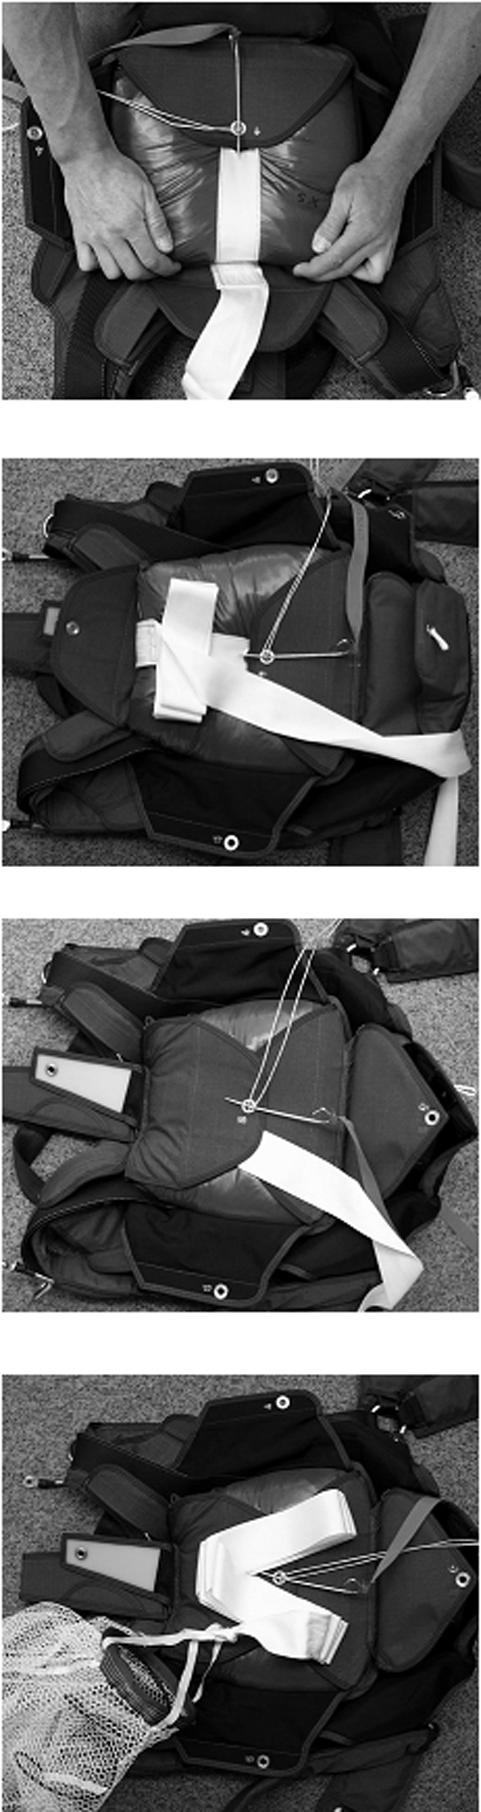 Page: 23 of 65 Carefully stuff the top part of the freebag into the container. The pilot-chute bridle of the freebag should be folded under the second flap (2) in 5 to 6 medium-size S-folds.